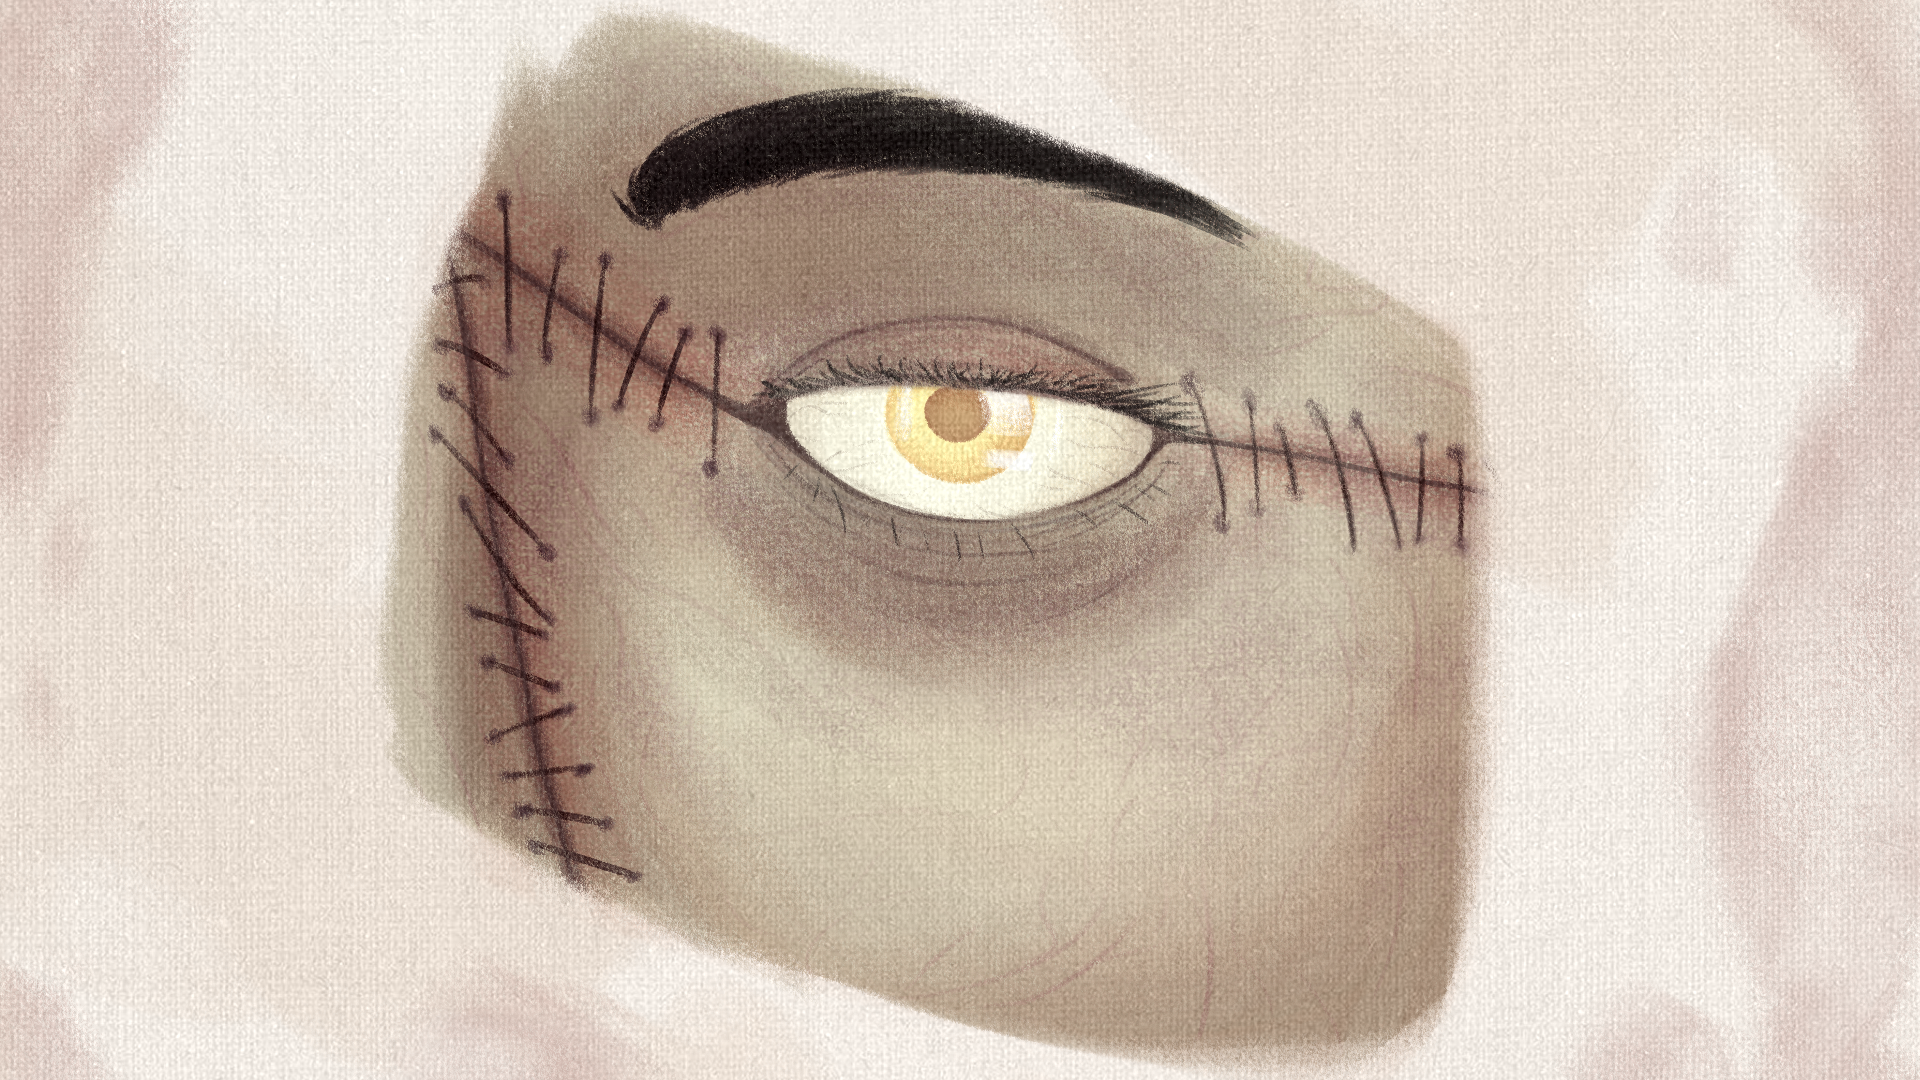 A digital painting of Steve's left eye, eyebrow, and cheek. The painting appears to be unfinished, and a canvas stained with light red can be seen behind it.